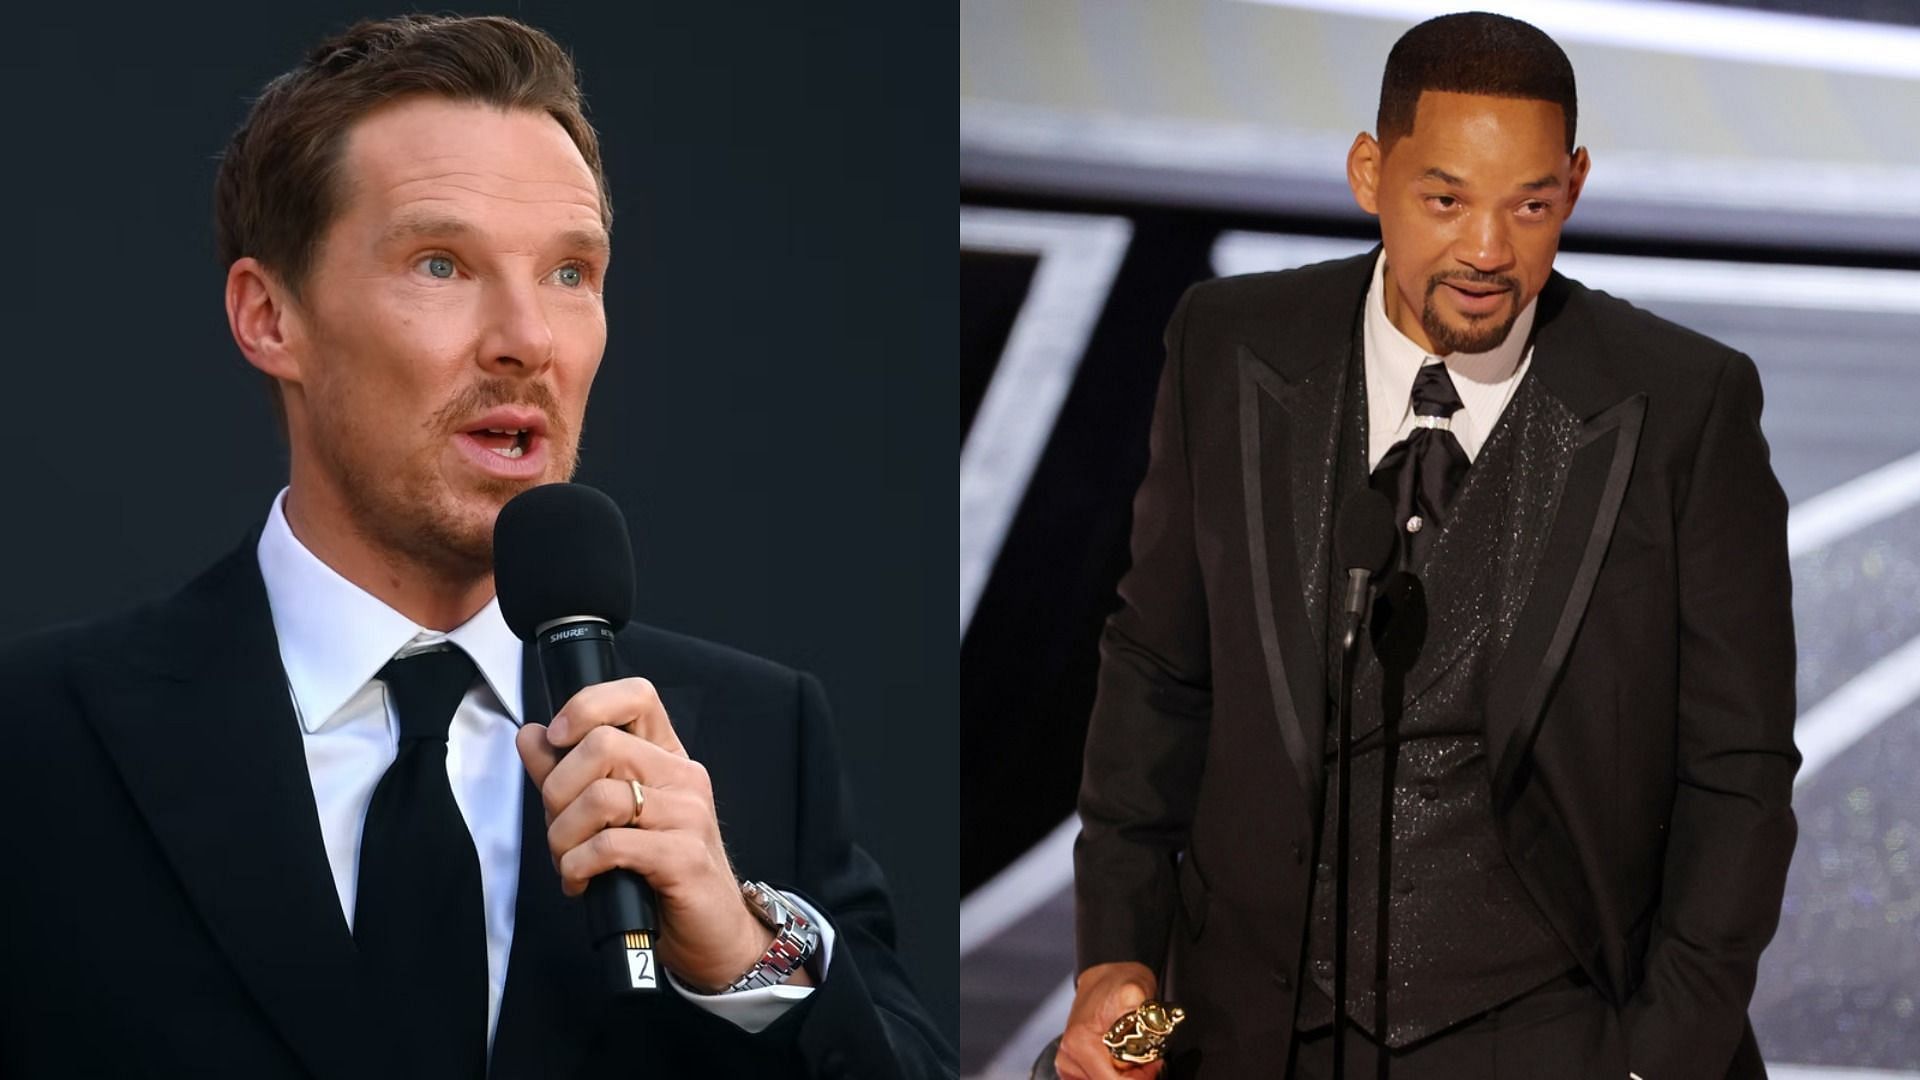 Benedict Cumberbatch lost the Academy Award for Best Actor to Will Smith (Image via Getty Images/Dave J Hogan/Neilson Barnard)